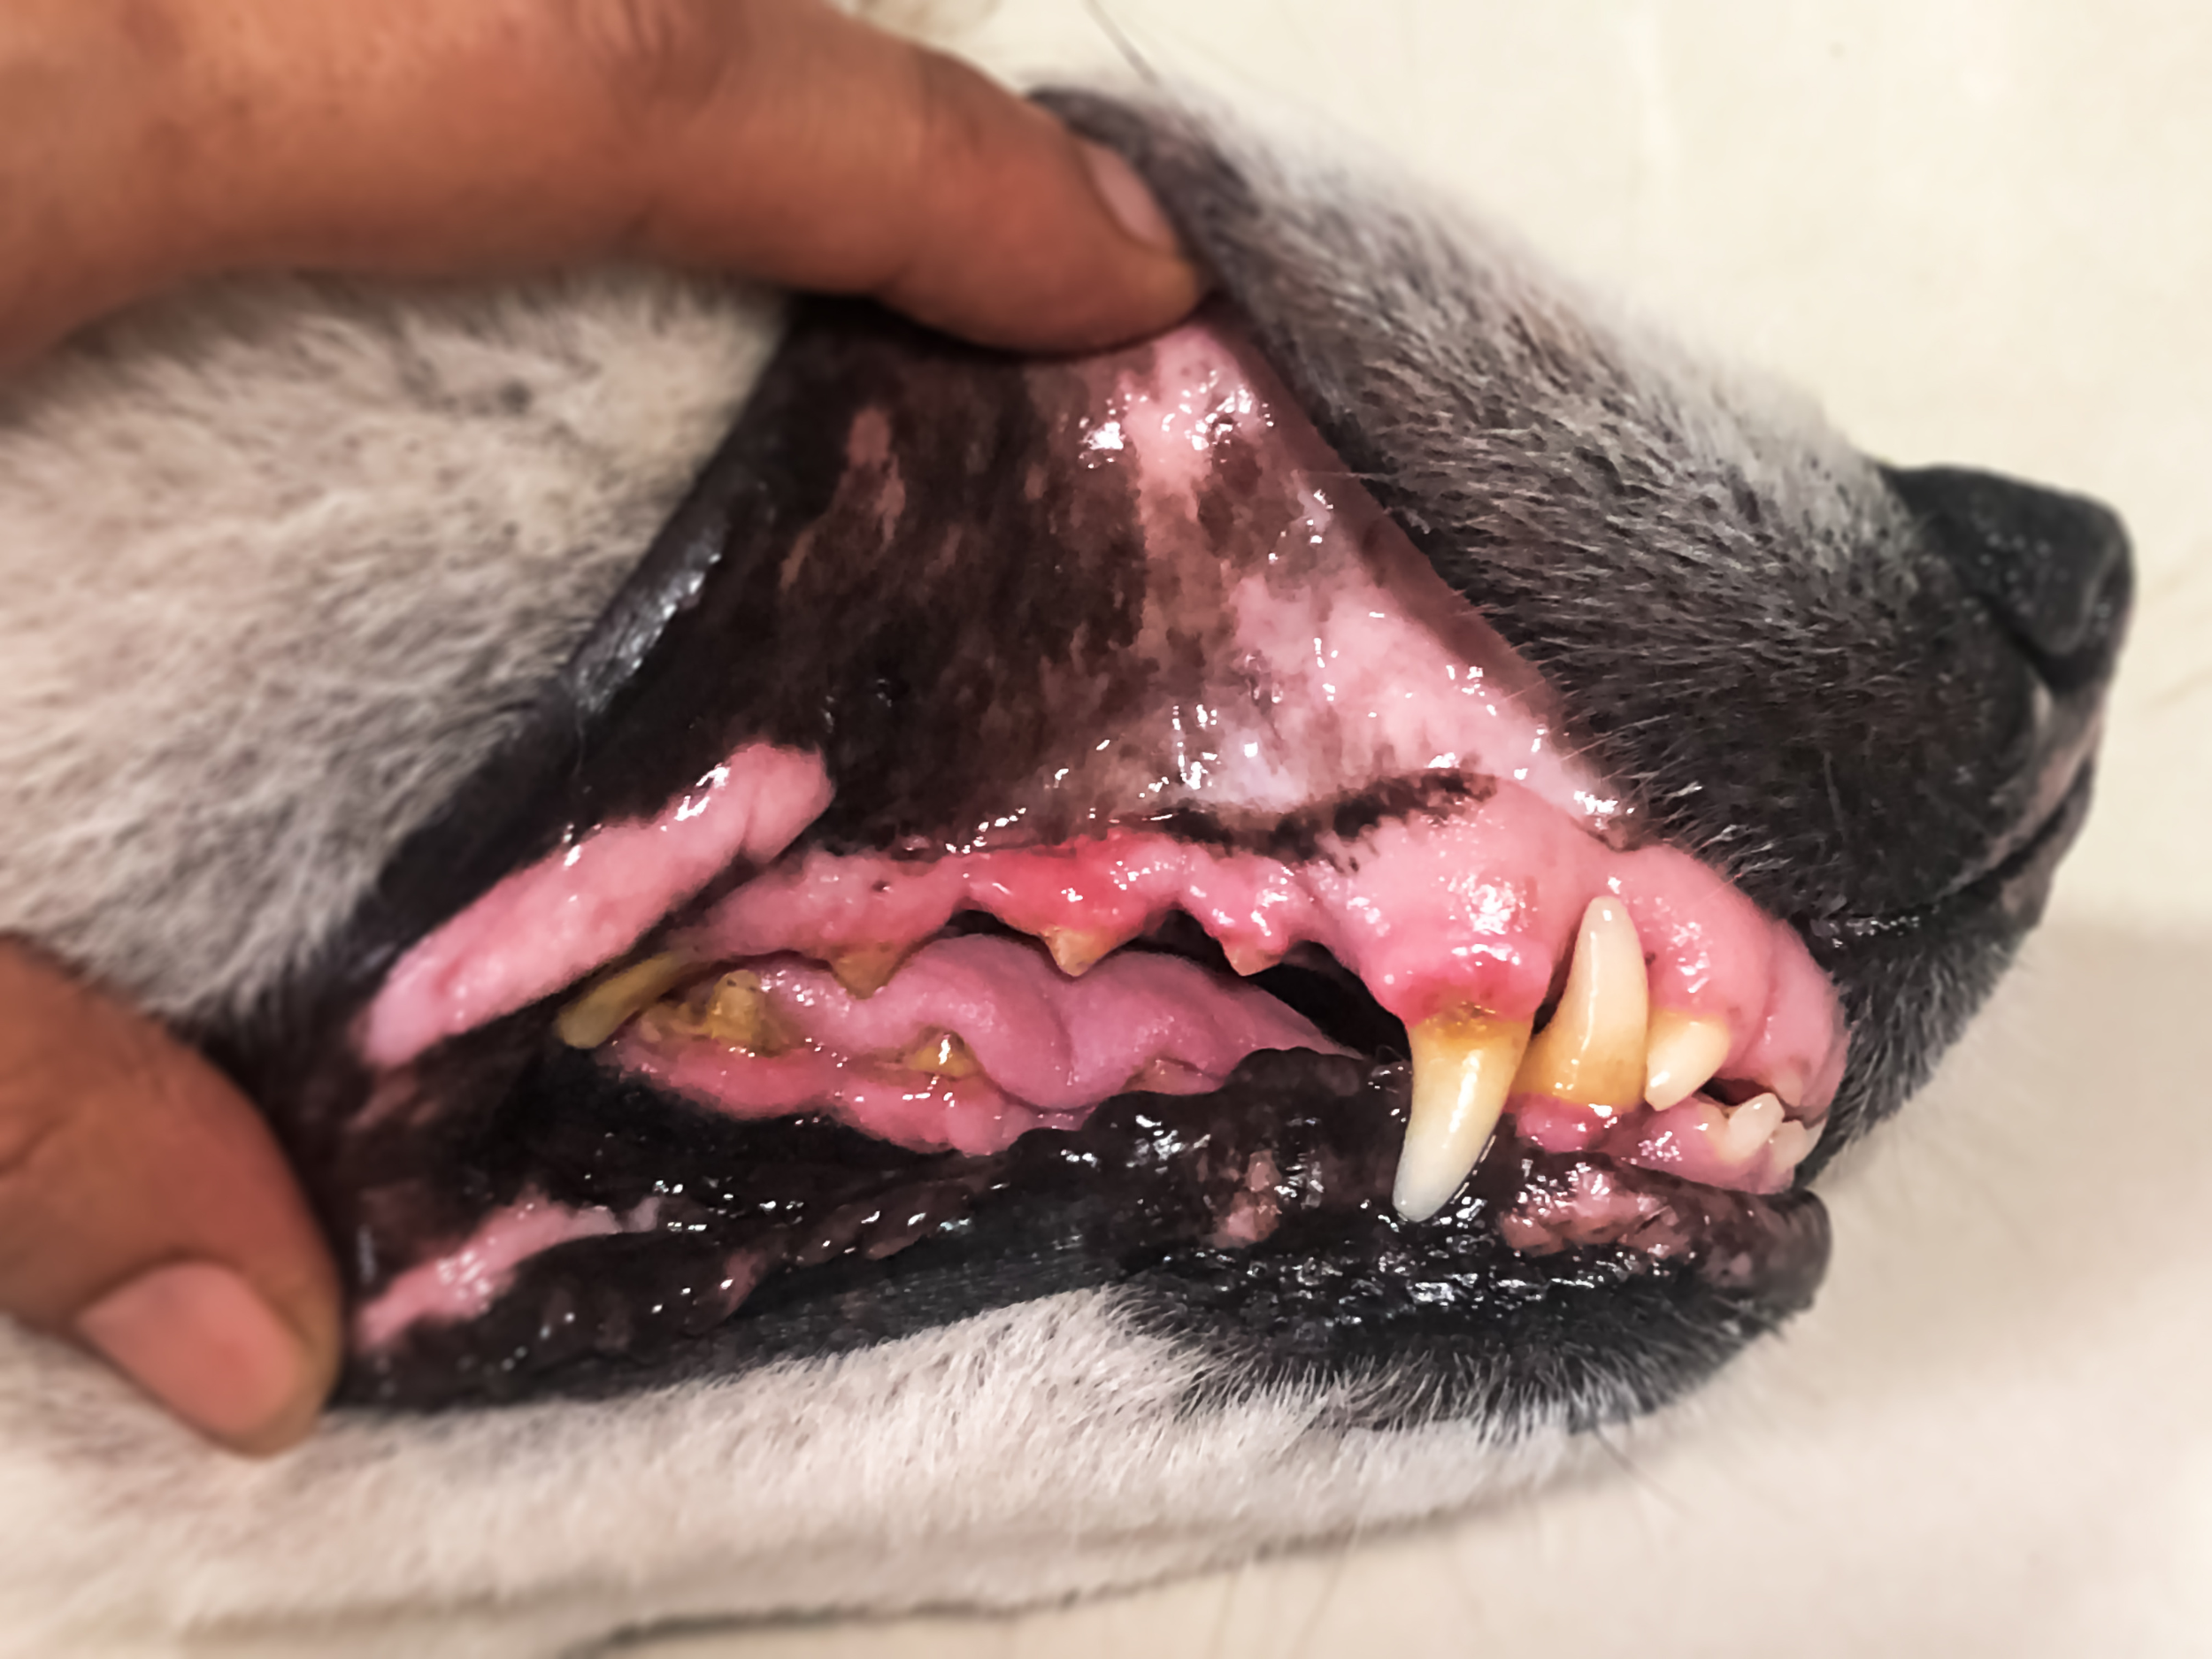 A vet looks at the moderate stage of gum disease in dogs mouth